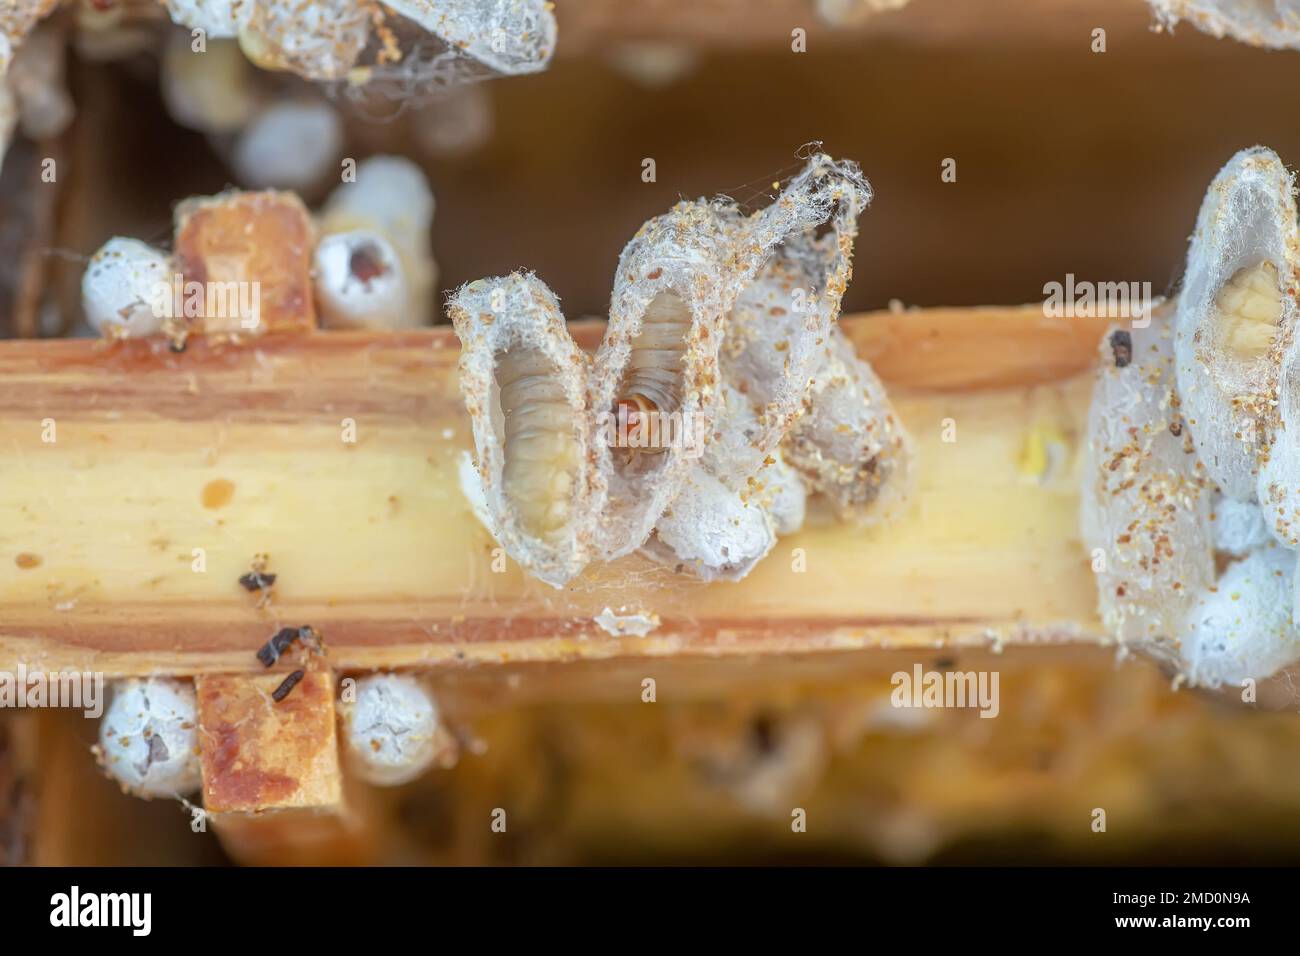 Fully-grown larvae form cocoons in comb debris, attached to frame or hive body. Larvae chew cavities to cement the cocoons, and lasting damage is done Stock Photo